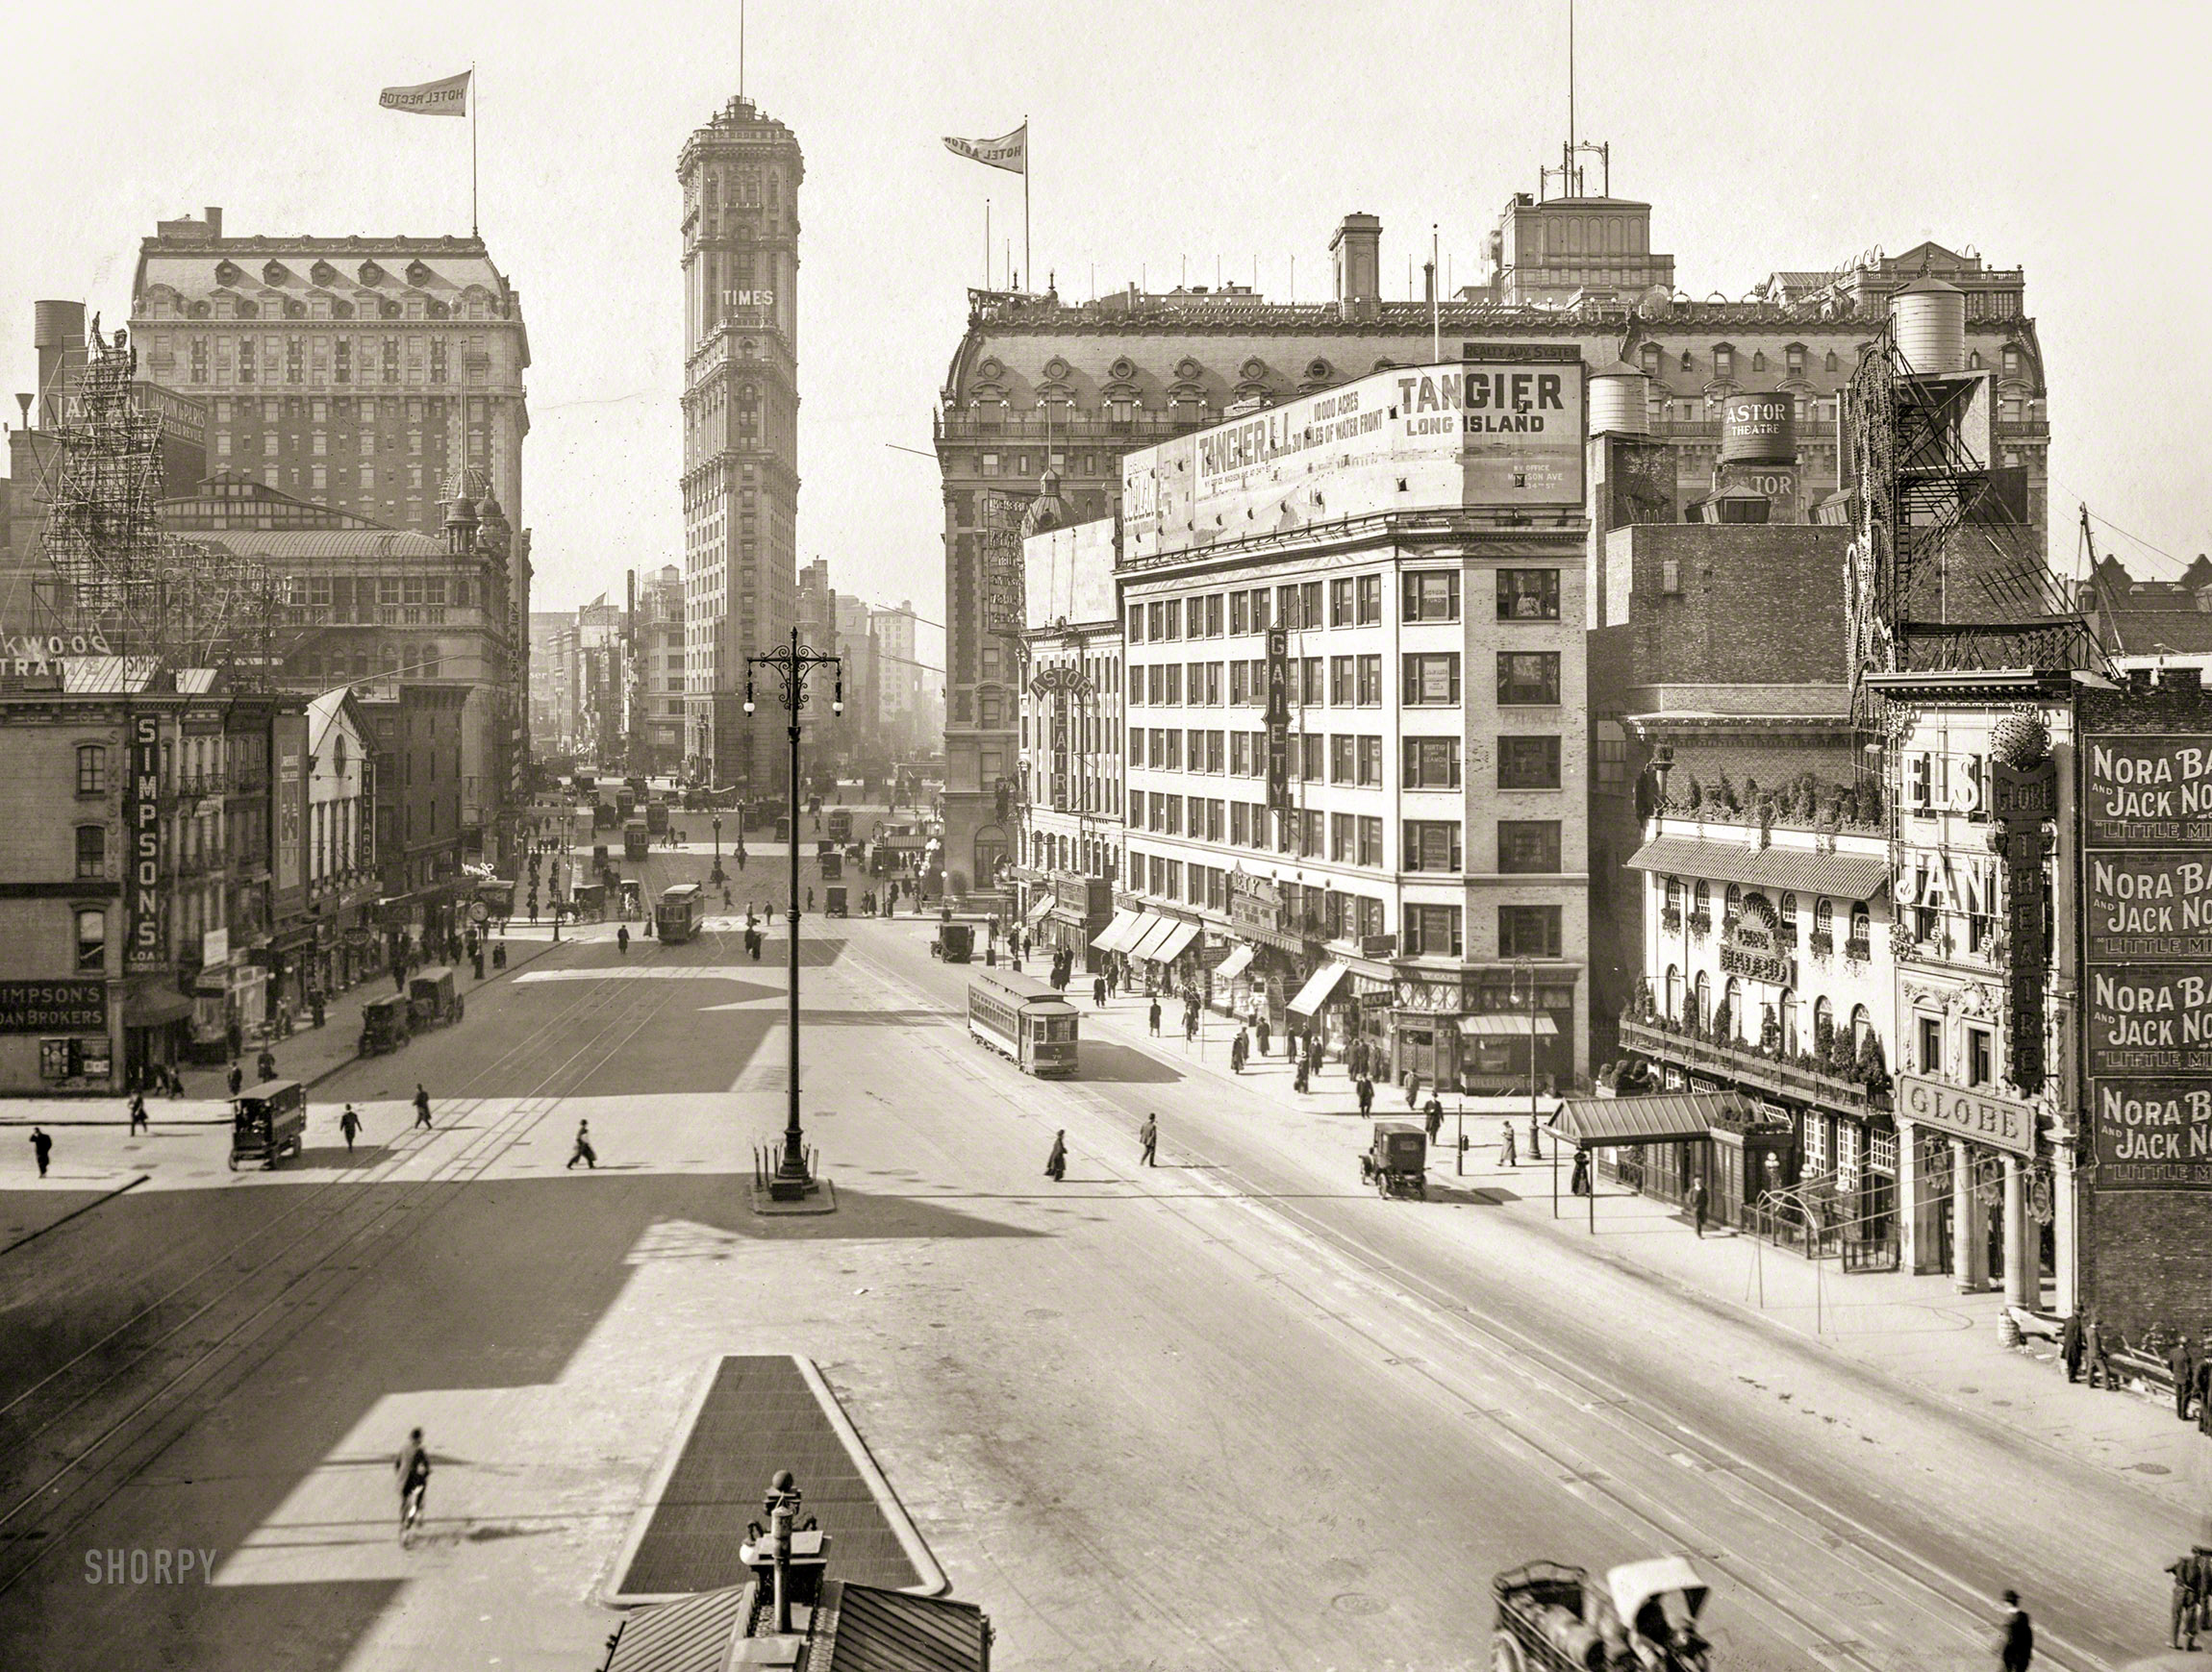 New York, 1911. "Longacre Square south." Times Square to you and me, with the Rector and Astor hotels flanking the New York Times building, now almost completely encased in electronic signage and launch pad for the New Year's "ball drop." Gelatin silver print by Irving Underhill. View full size.